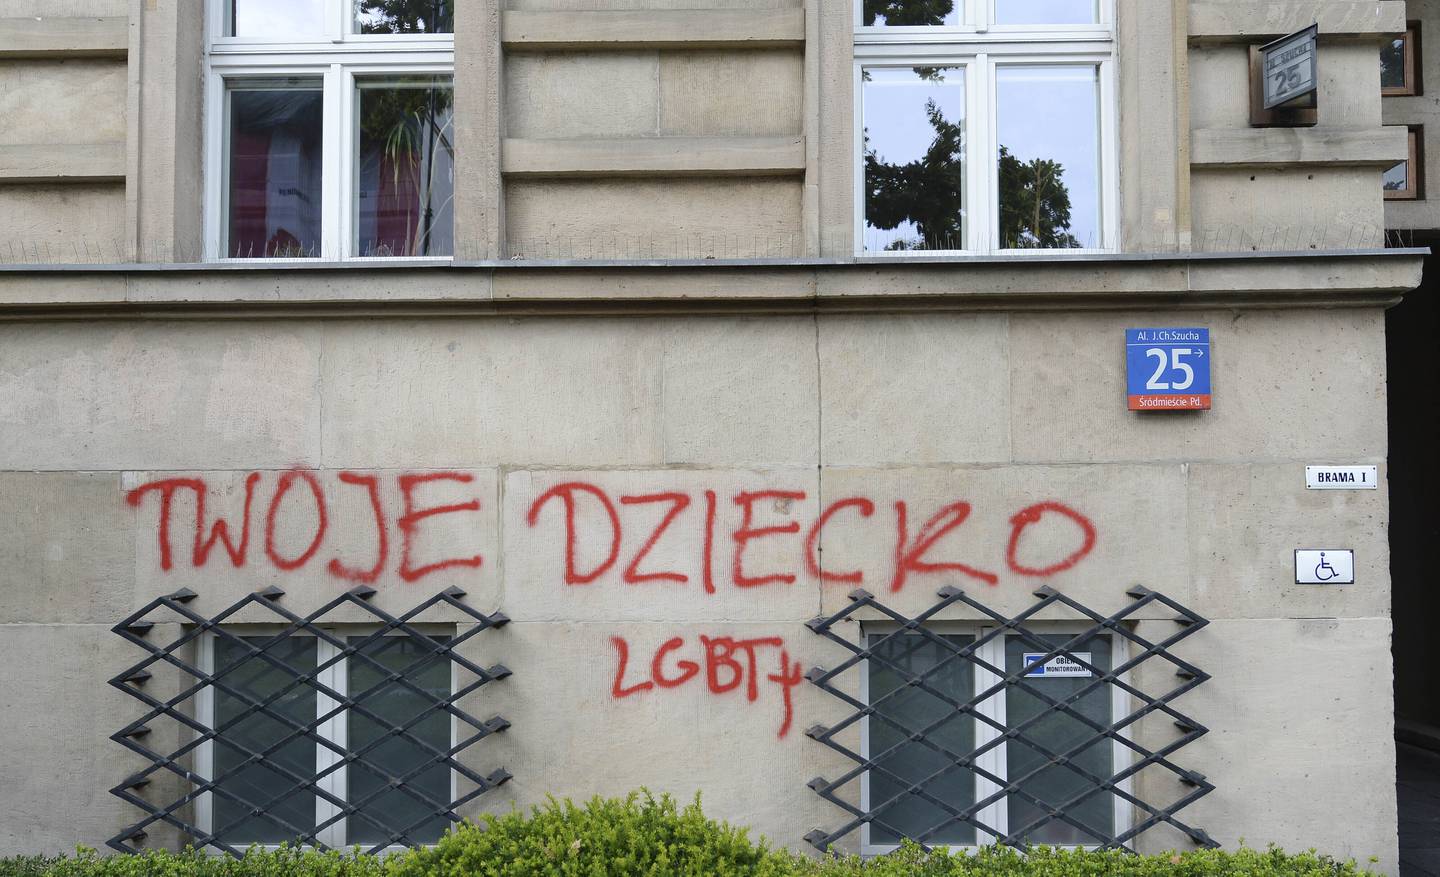 The names of young LGBT people who have died from suicide are shown spray painted on the Education Ministry building, an act of protest by LGBT activists, in Warsaw, Poland, Wednesday, Sept. 30, 2020. LGBT rights are the focus of a culture clash in Poland. A growing LGBT rights movement has been met with a backlash from the conservative government, church and many local communities. While President Donald Trump sees an ally in Poland on many issues, his ambassador this week said Poland's conservative government is on the "wrong side of history" on this issue.(AP Photo/Czarek Sokolowski)